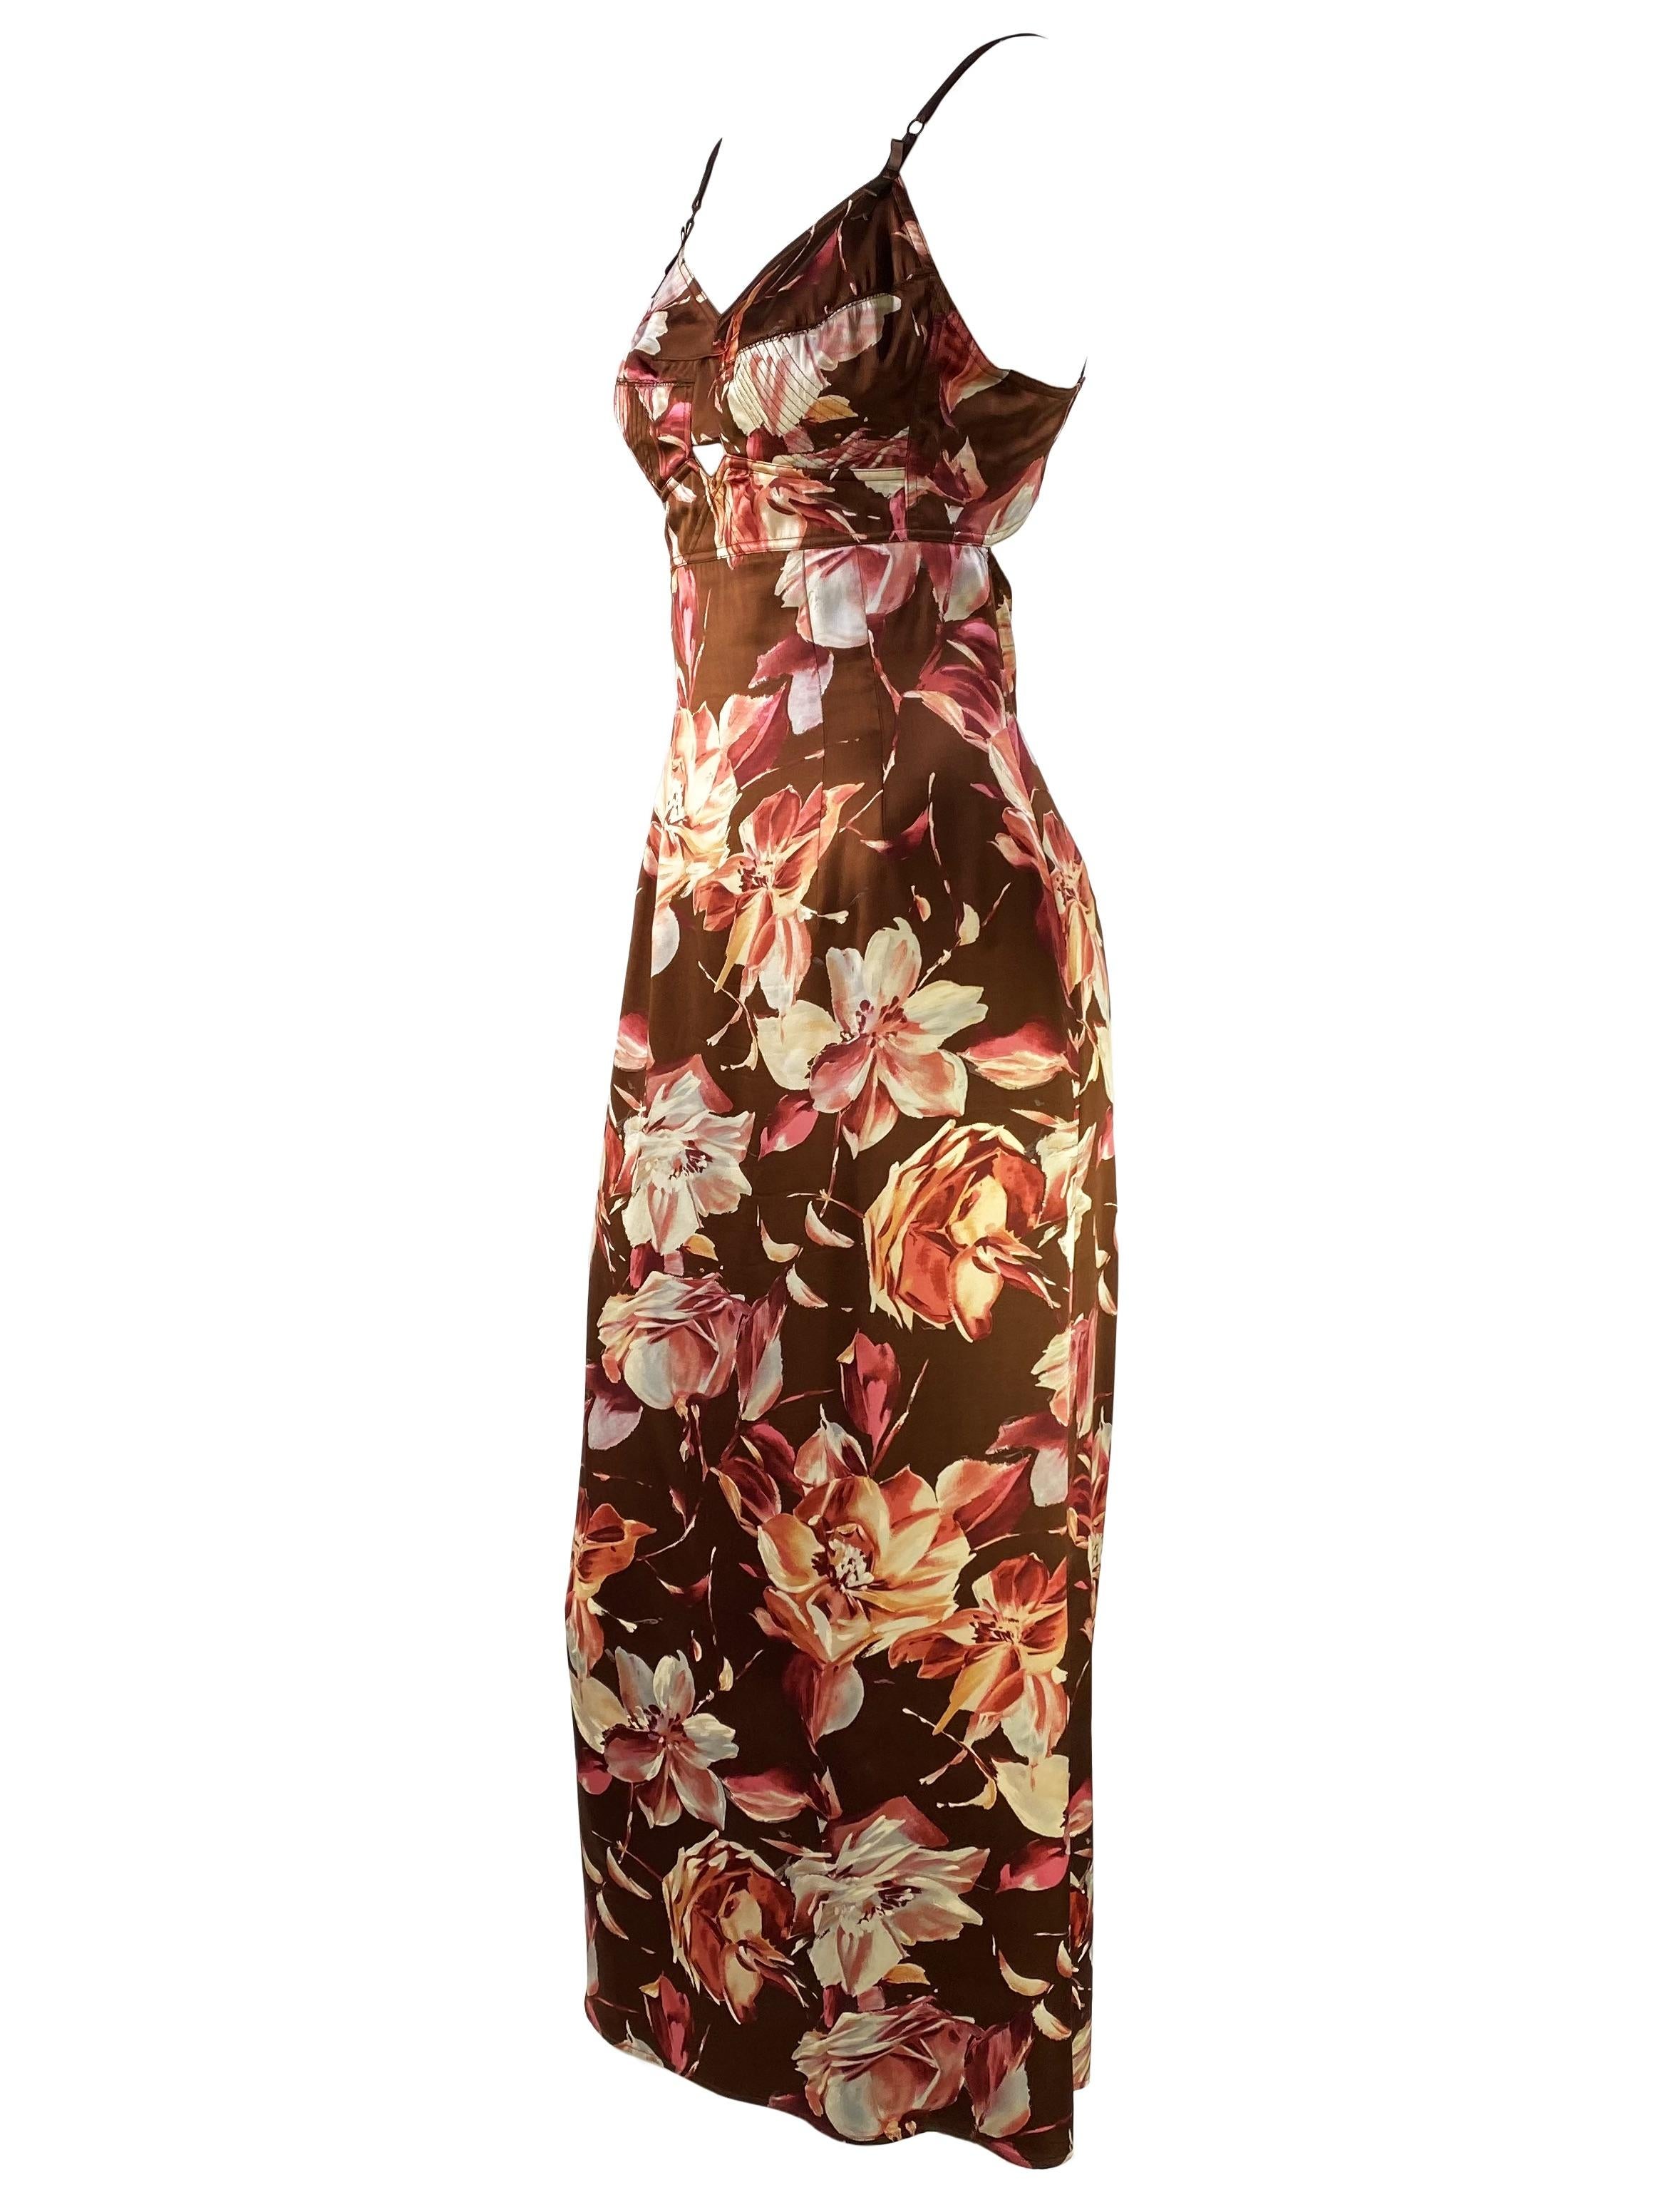 Presenting a stunning silk satin floral Dolce & Gabbana hourglass shape dress from their Spring/Summer 1997 collection. This dress debuted in the runway presentation in multiple similar floral fabric patterns. A small cutout at the bust and